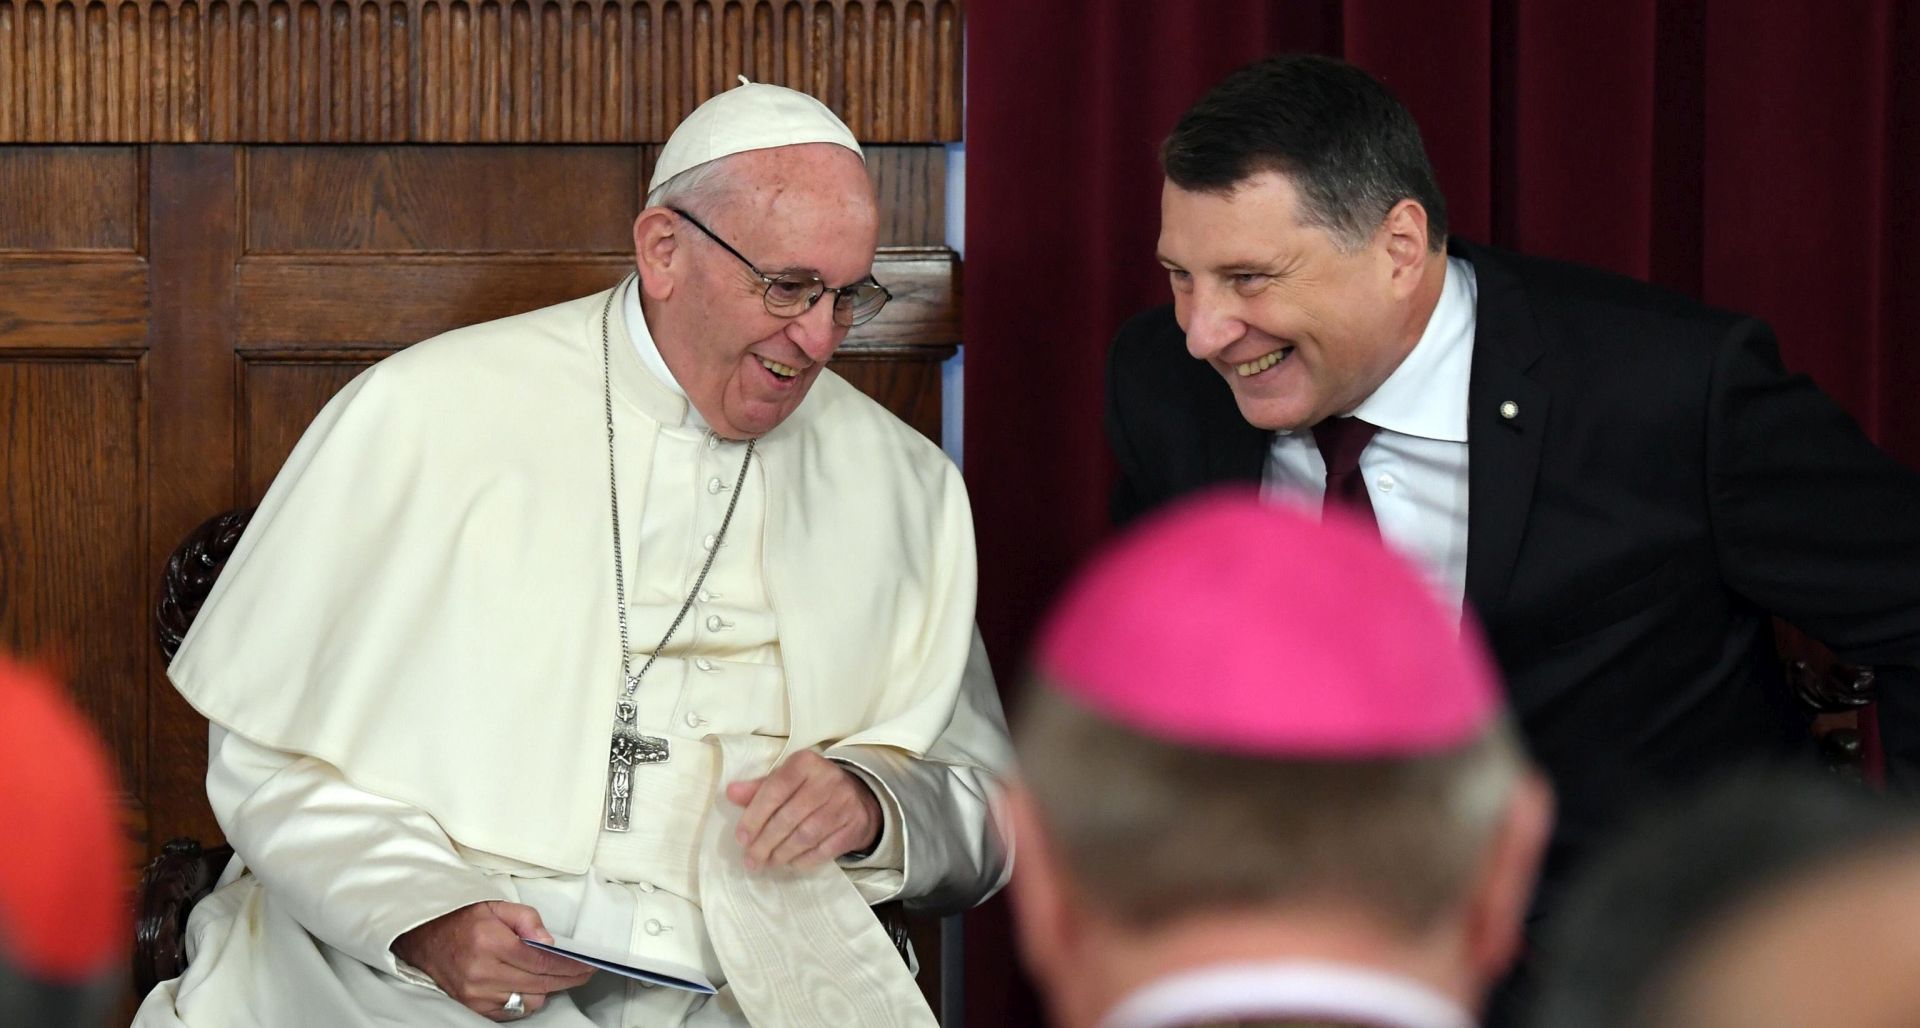 epa07042655 Pope Francis talks to President of Latvia Raimonds Vejonis (R), during his meeting with authorities, civil society and diplomatic corps, in the Reception Hall of the Presidential Palace in Riga, Latvia, 24 September 2018. Pope Francis is visiting Lithuania, Latvia and Estonia for the Apostolic Journey from 22 to 25 September 2018.  EPA/ALESSANDRO DI MEO